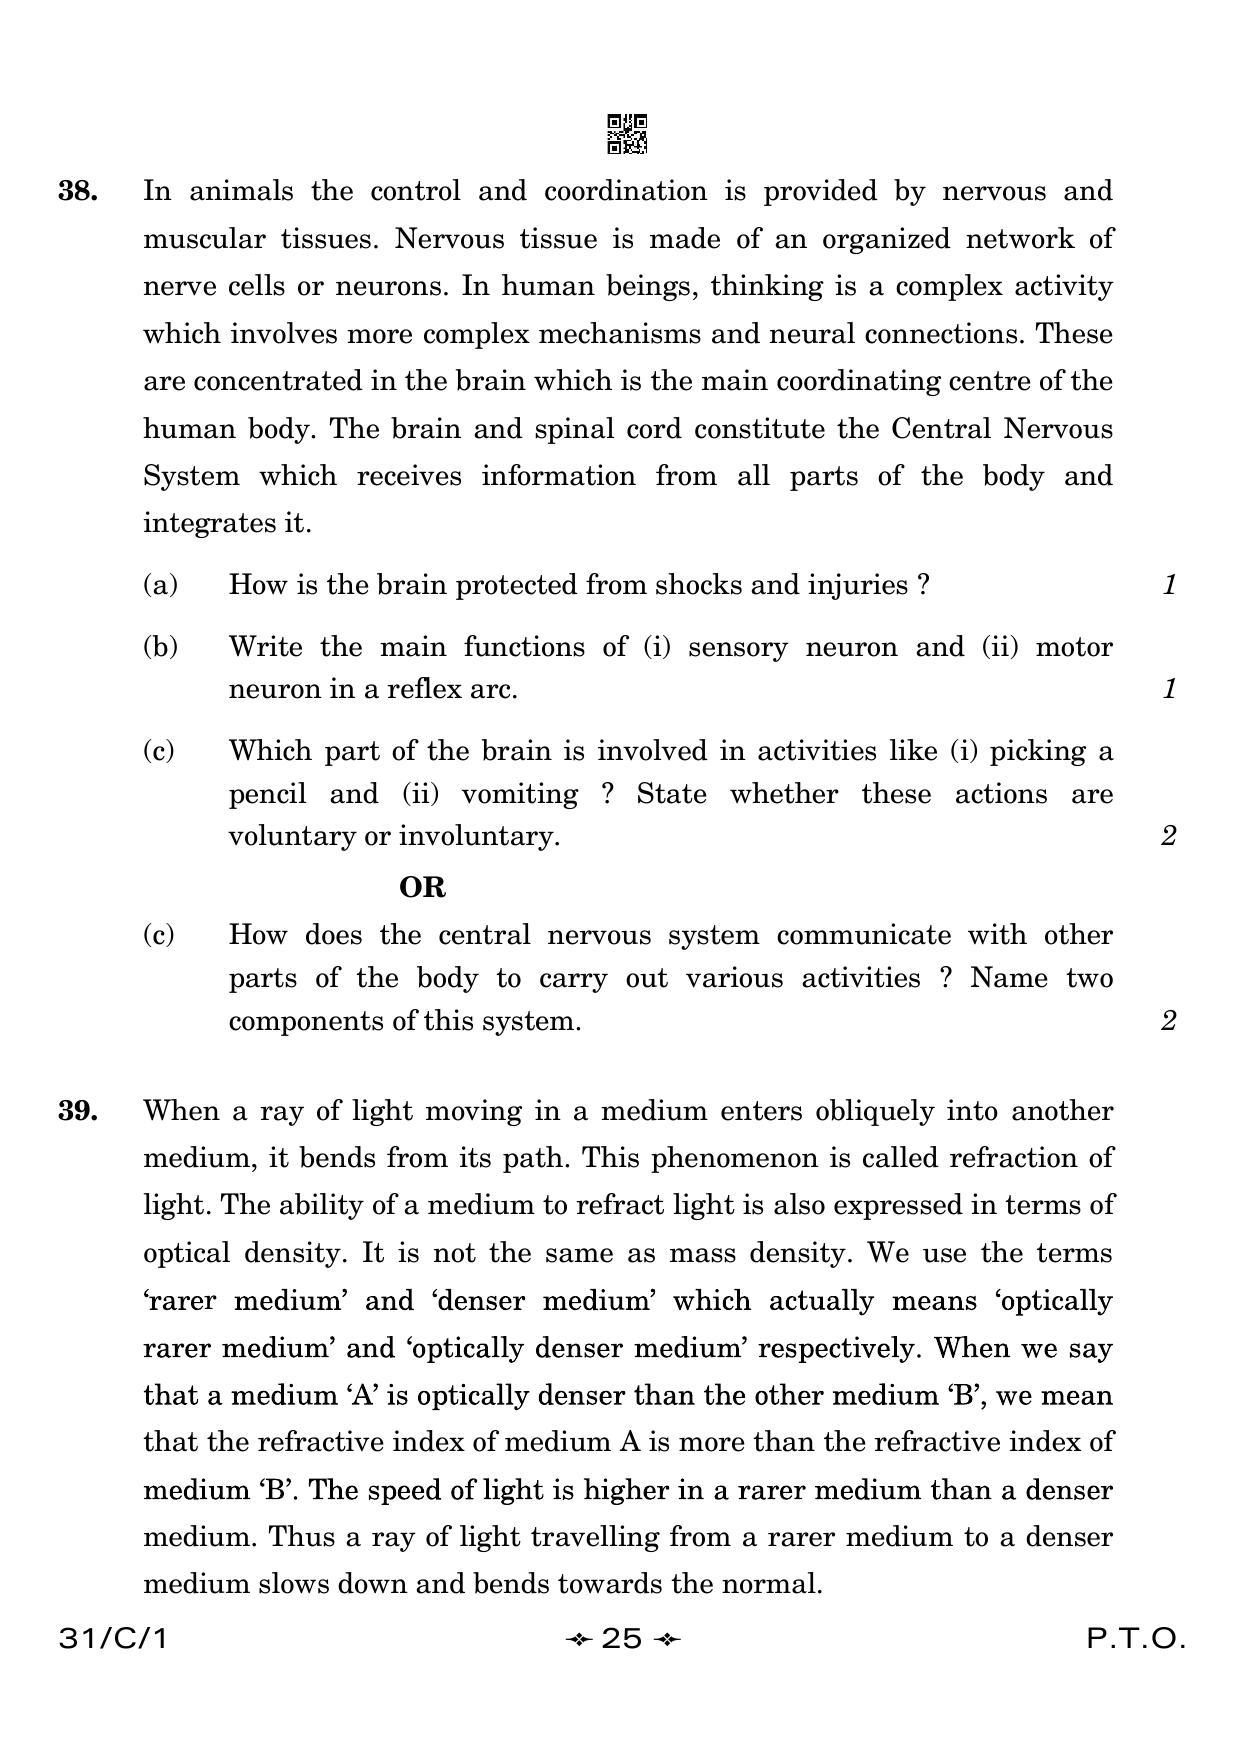 CBSE Class 10 31-1 Science 2023 (Compartment) Question Paper - Page 25